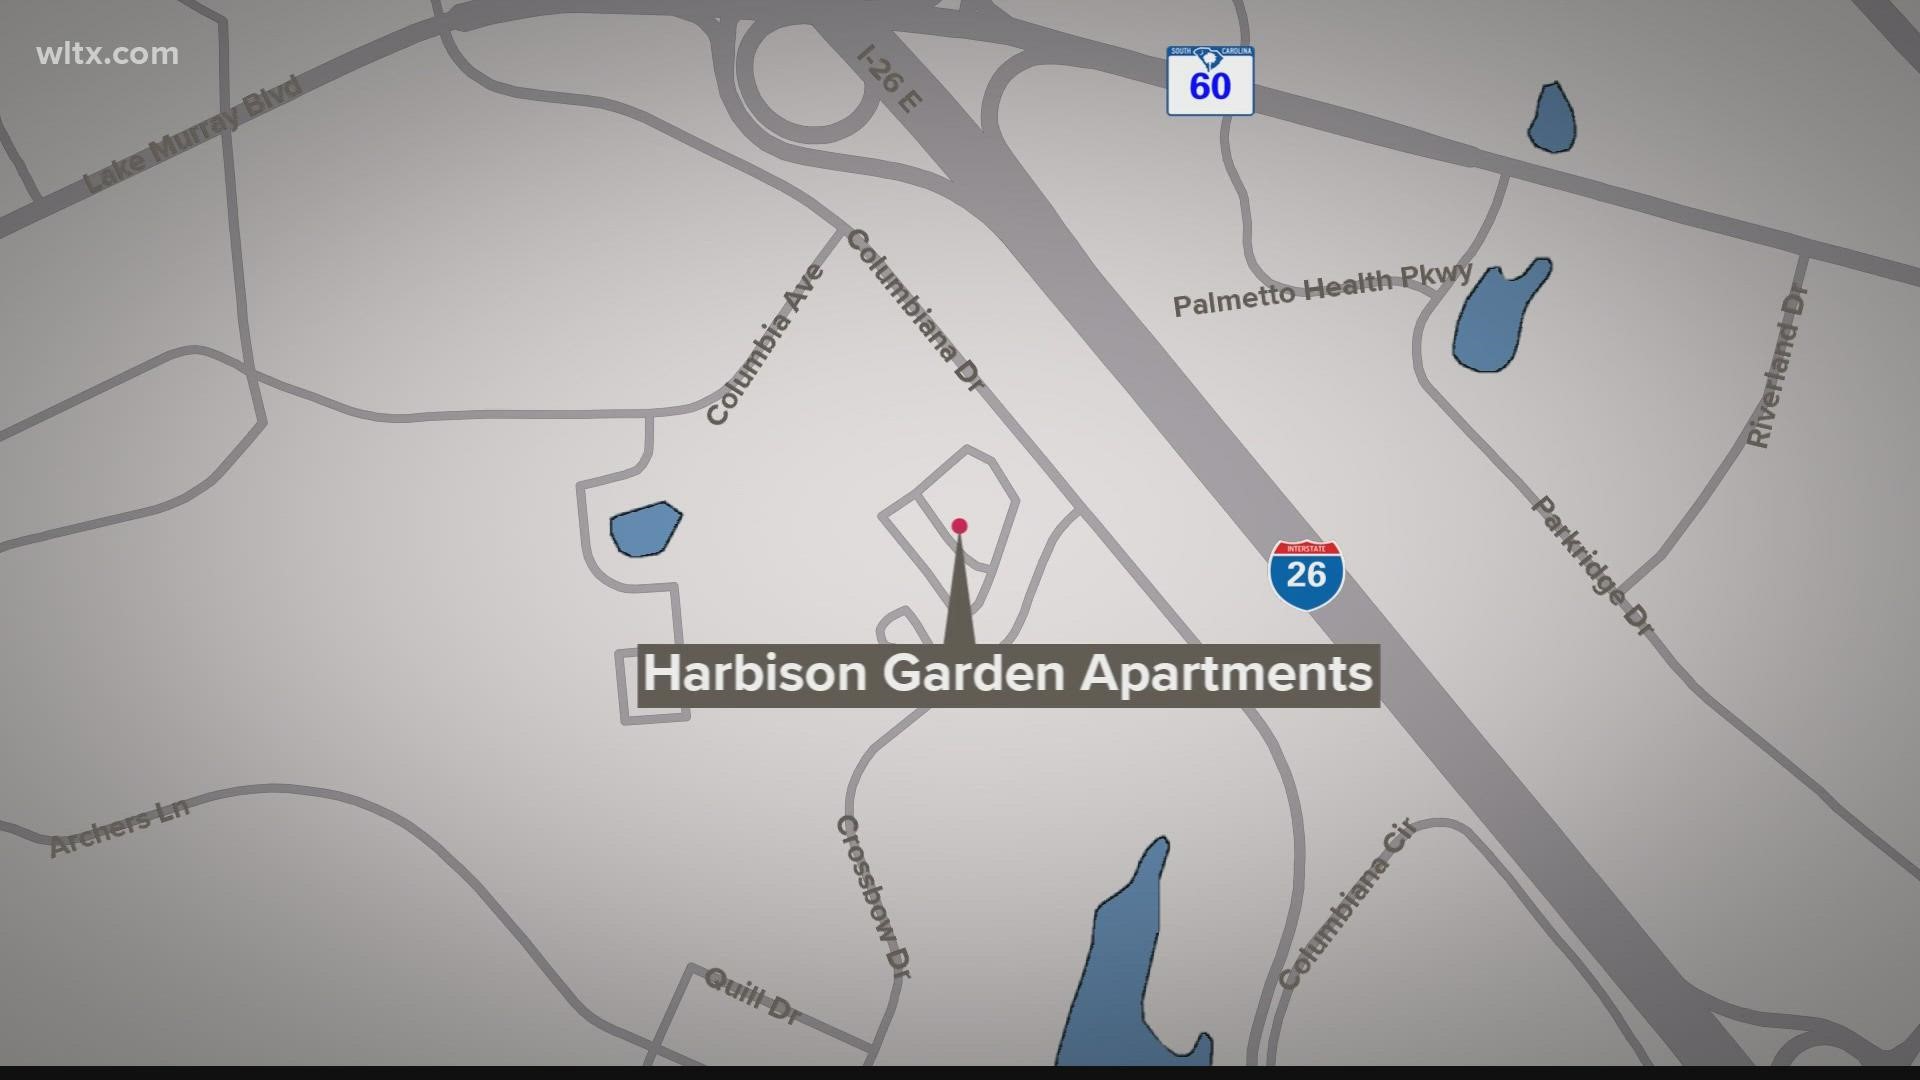 Investigators say a 13-year-old male and a young friend were handling a gun at the Harbison Gardens Apartments.